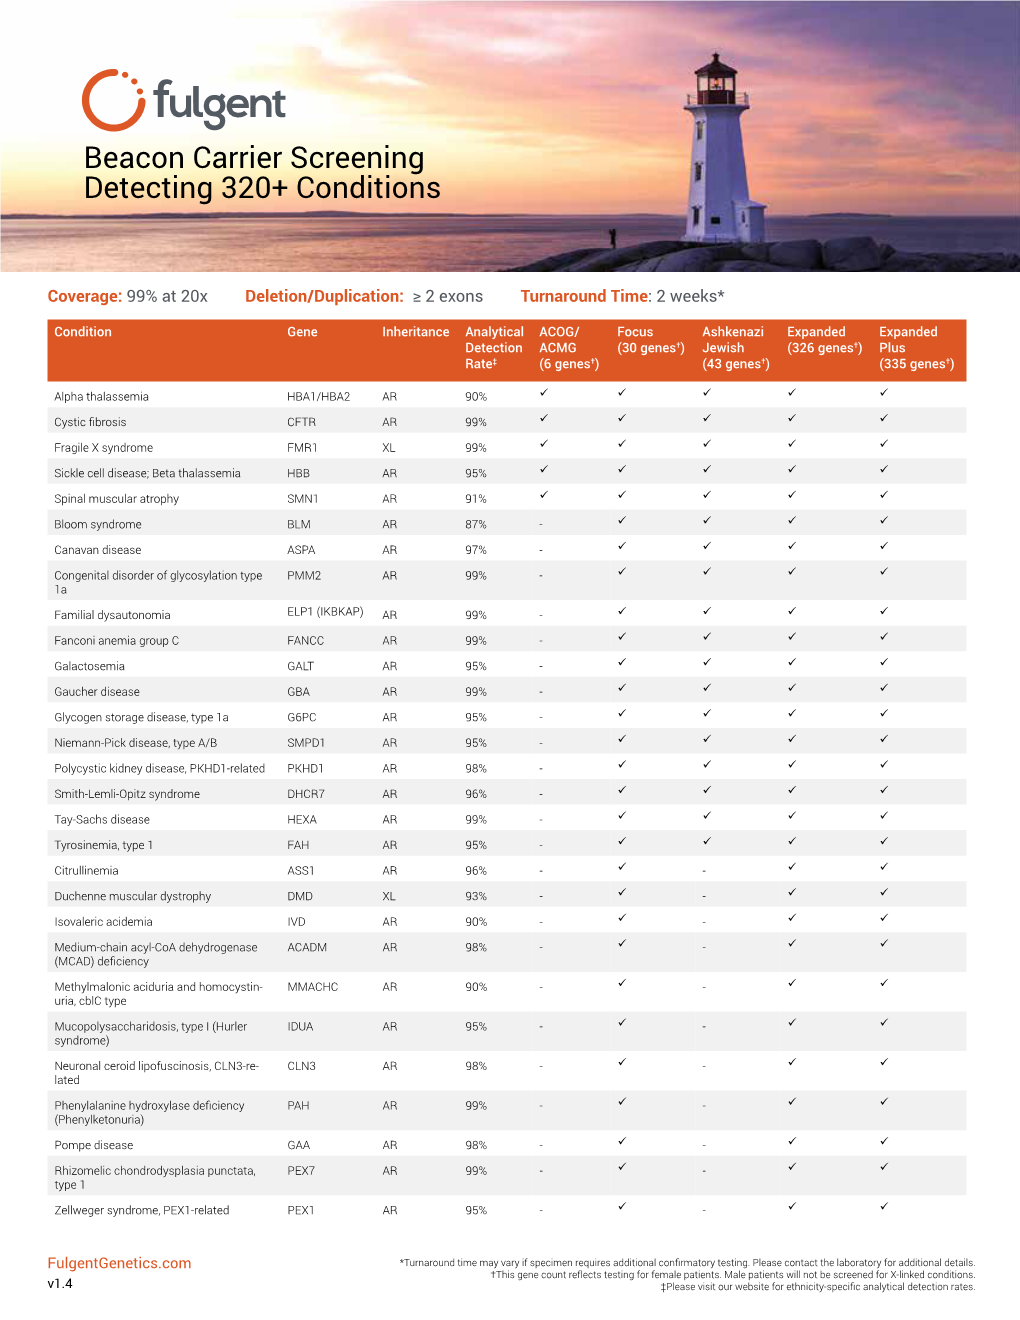 Beacon Carrier Screening Detecting 320+ Conditions